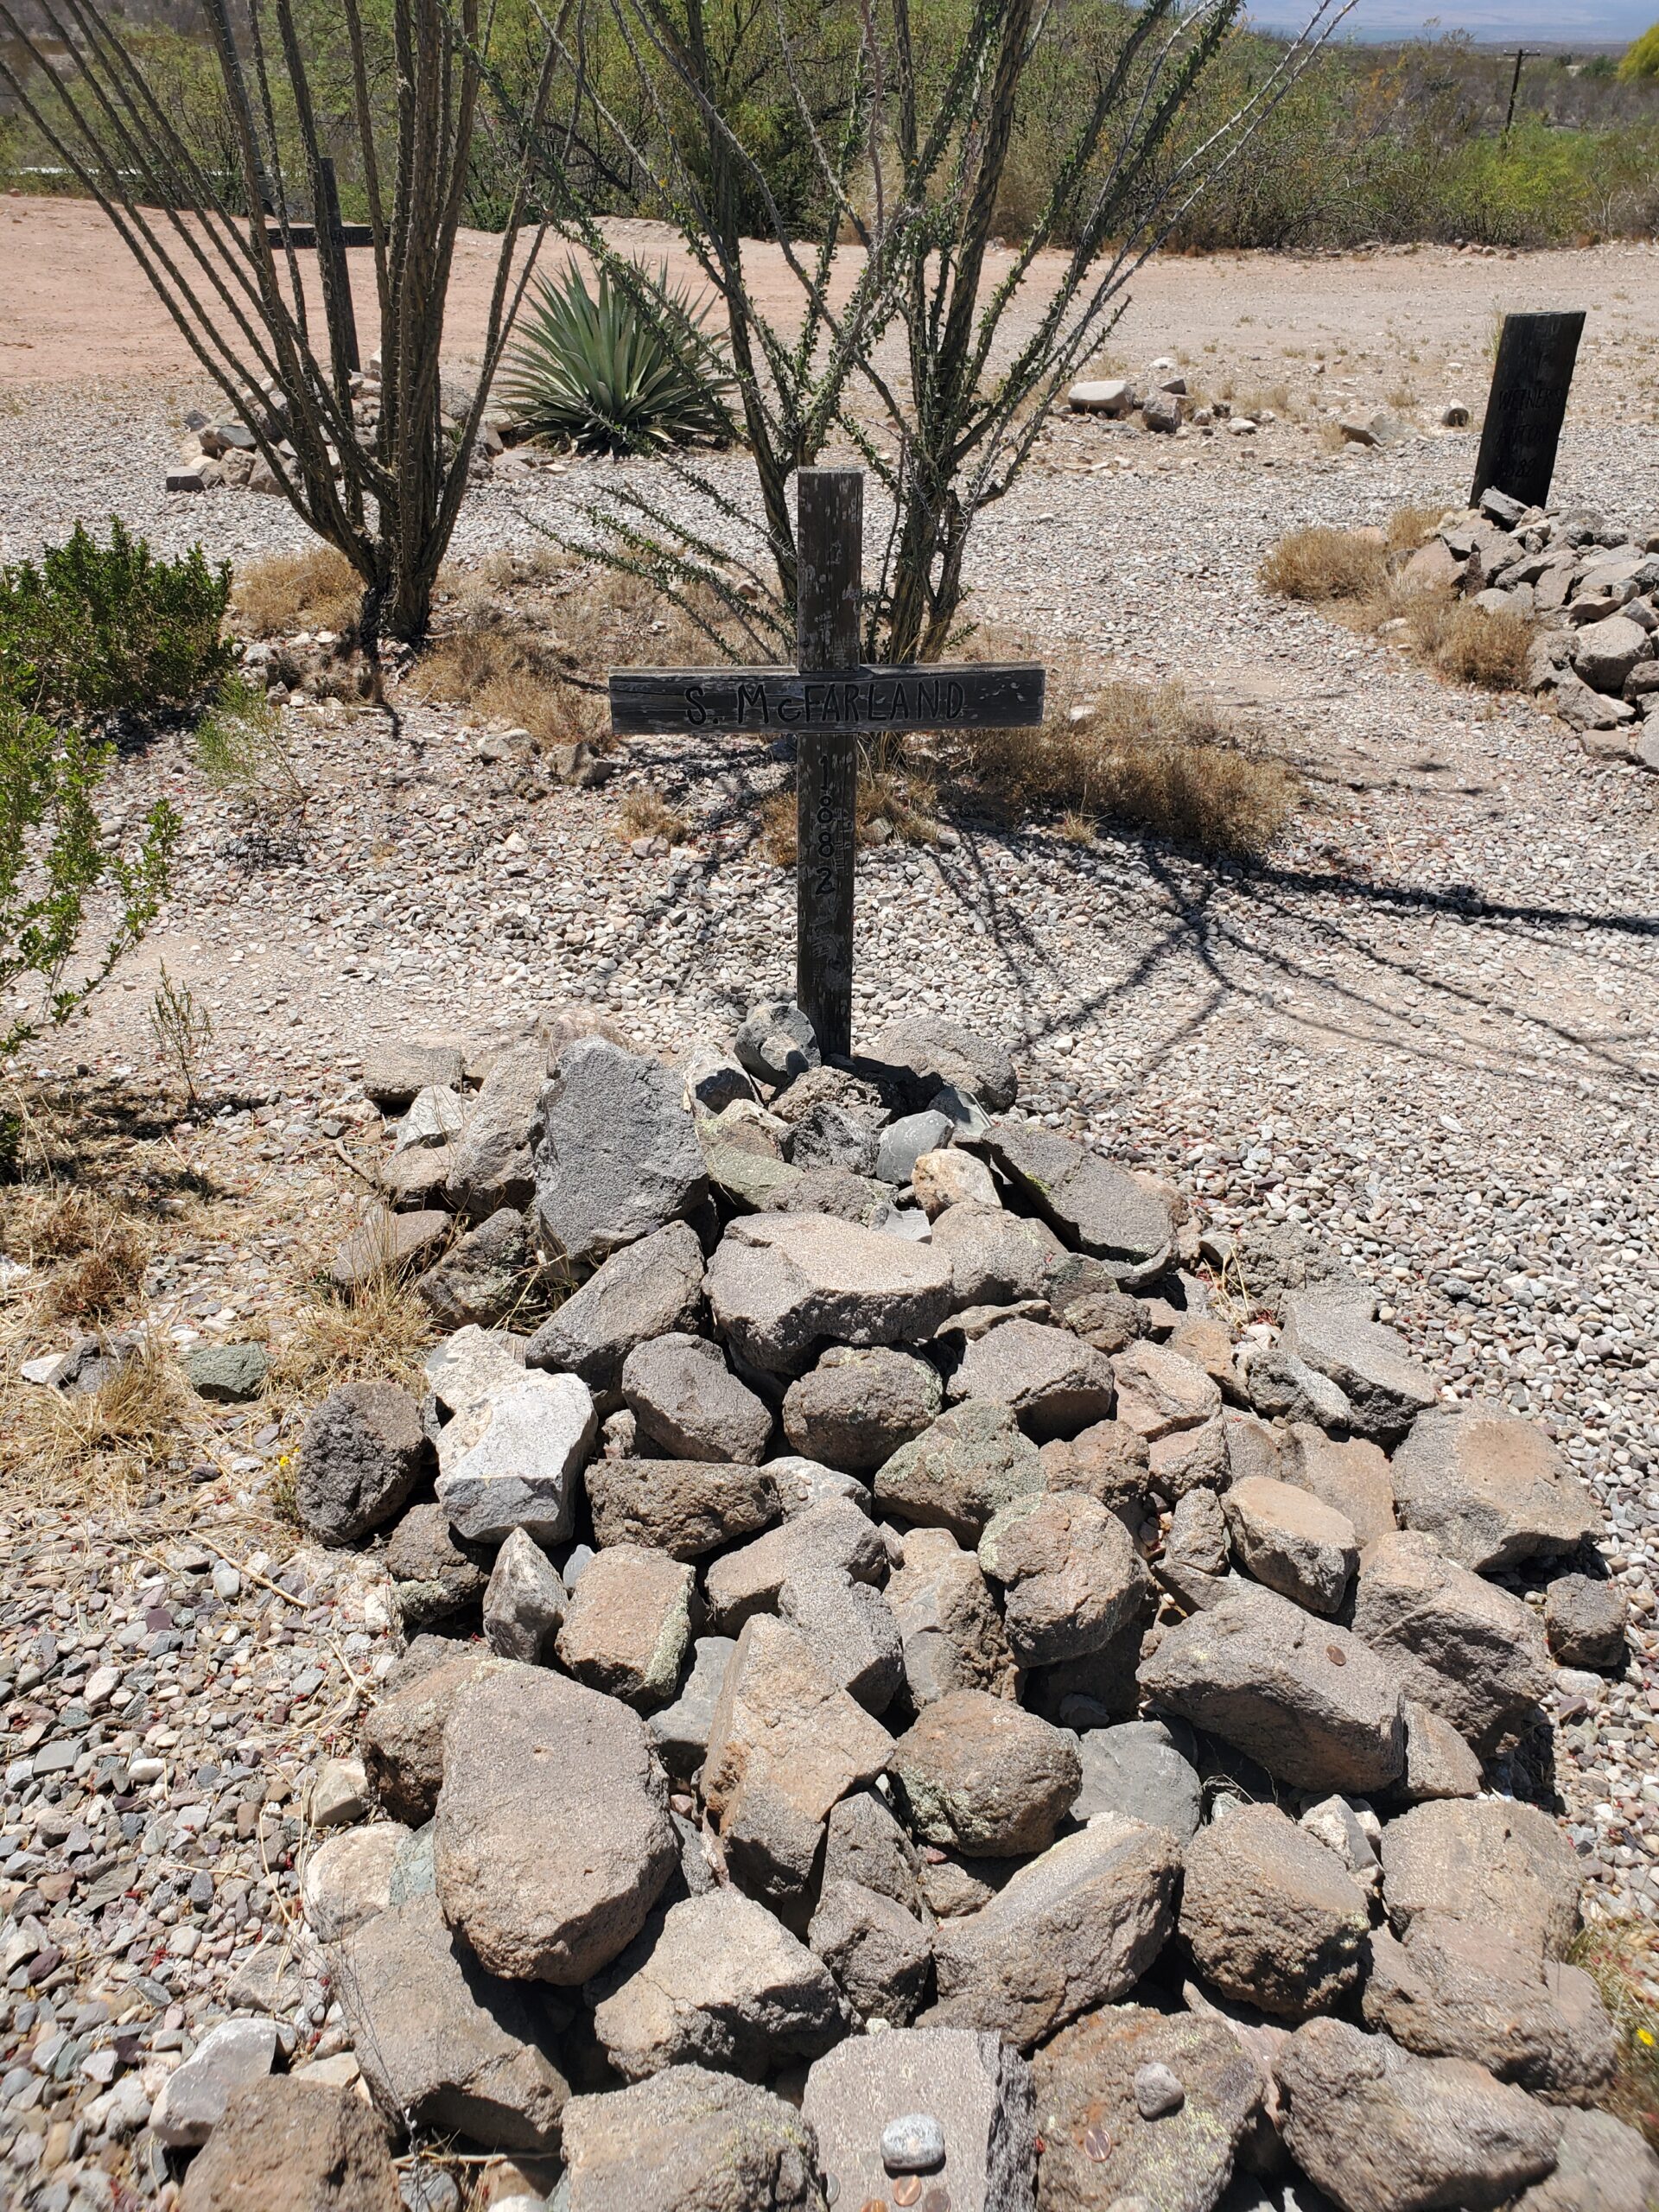 This simple cross grave marker is labeled as one "S McFarland"